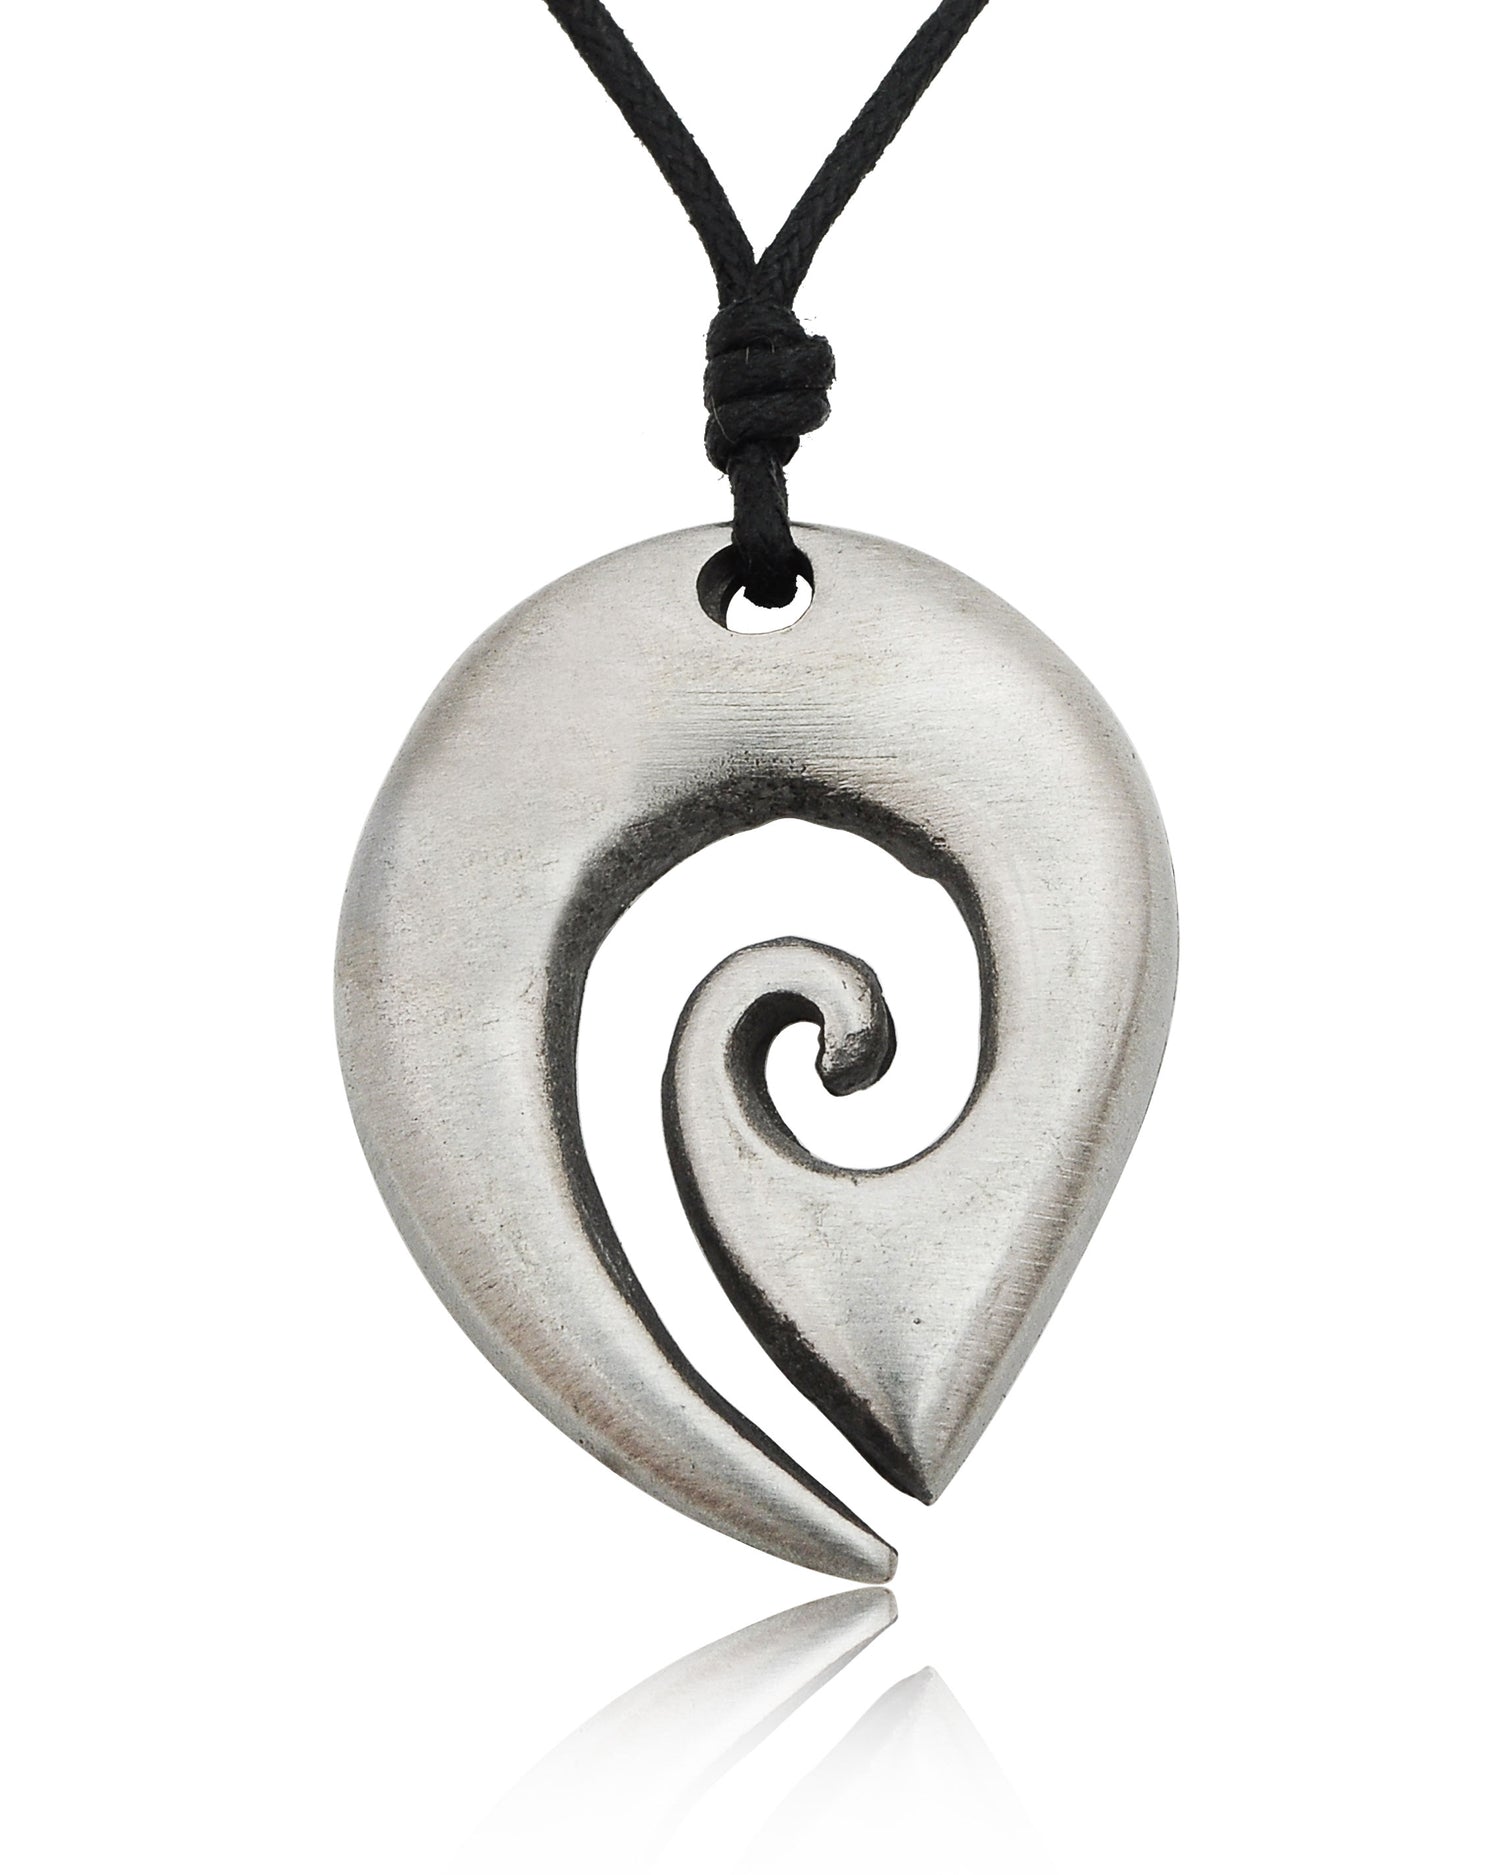 Flawless New Maori Fishing Hook Silver Pewter Charm Necklace Pendant J –